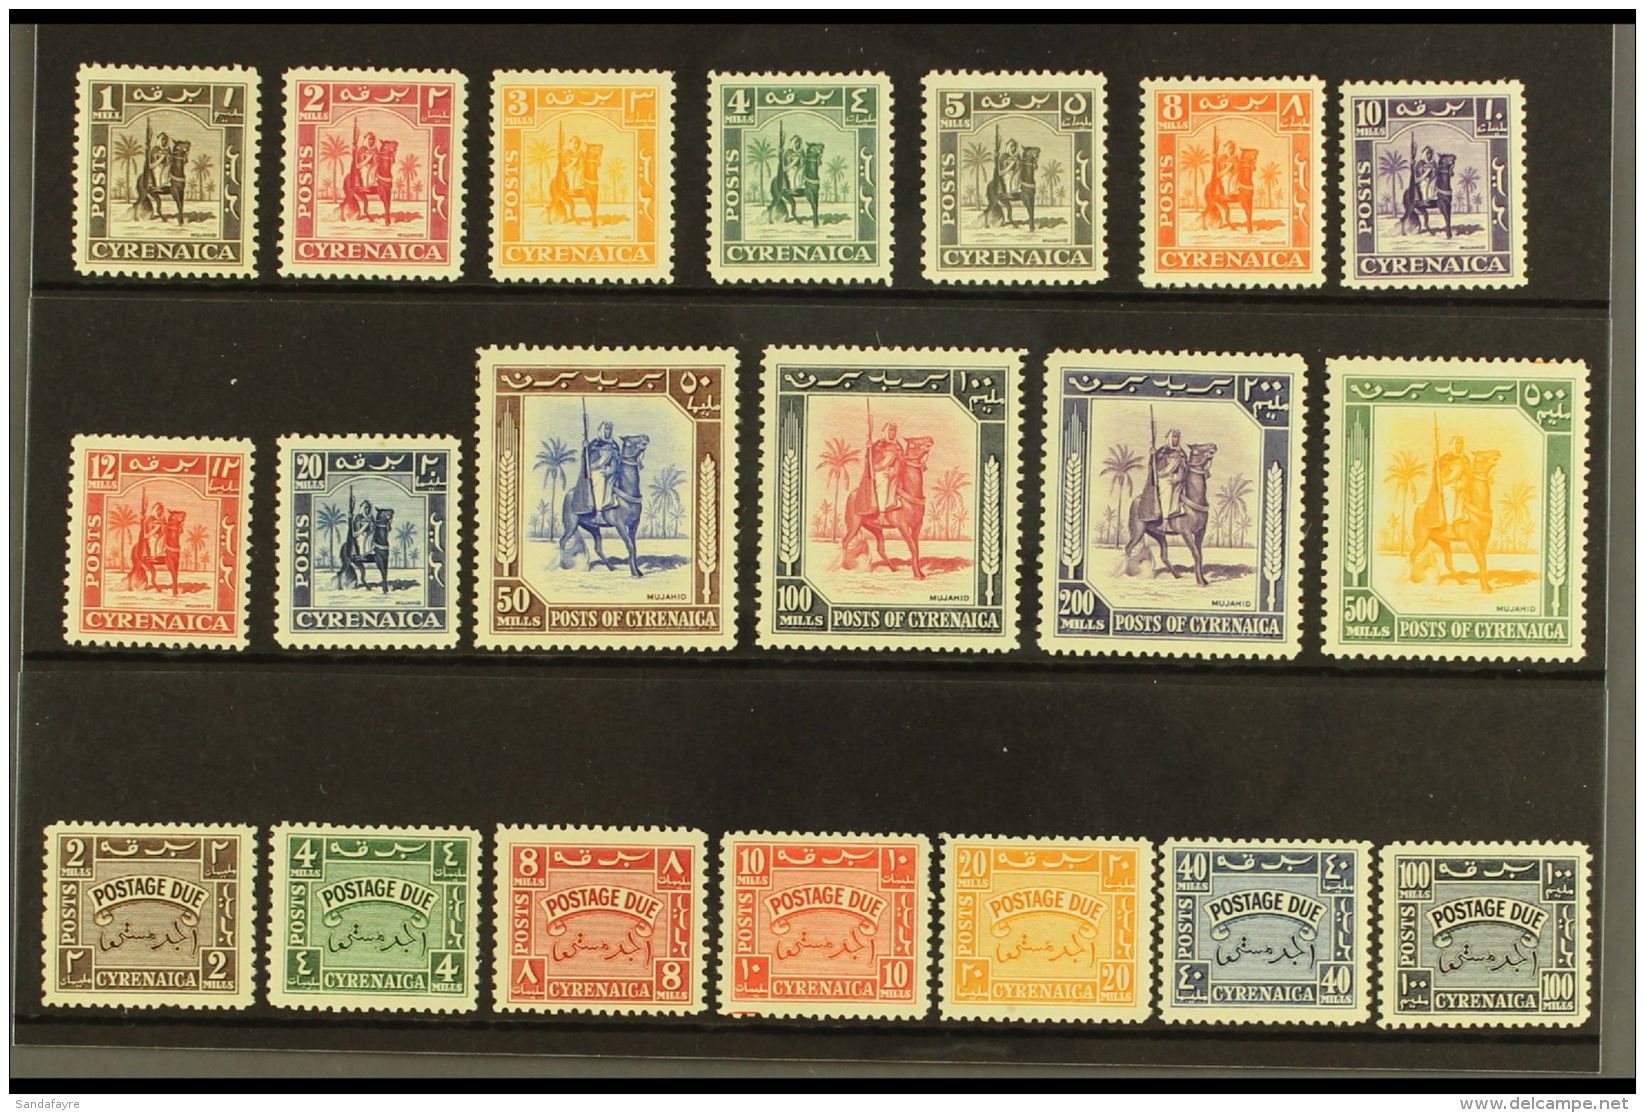 CYRENAICA 1950 Complete Issue Including Horseman Set And Postage Dues, SG 136/48, D149/155, Very Fine And Fresh... - Africa Orientale Italiana